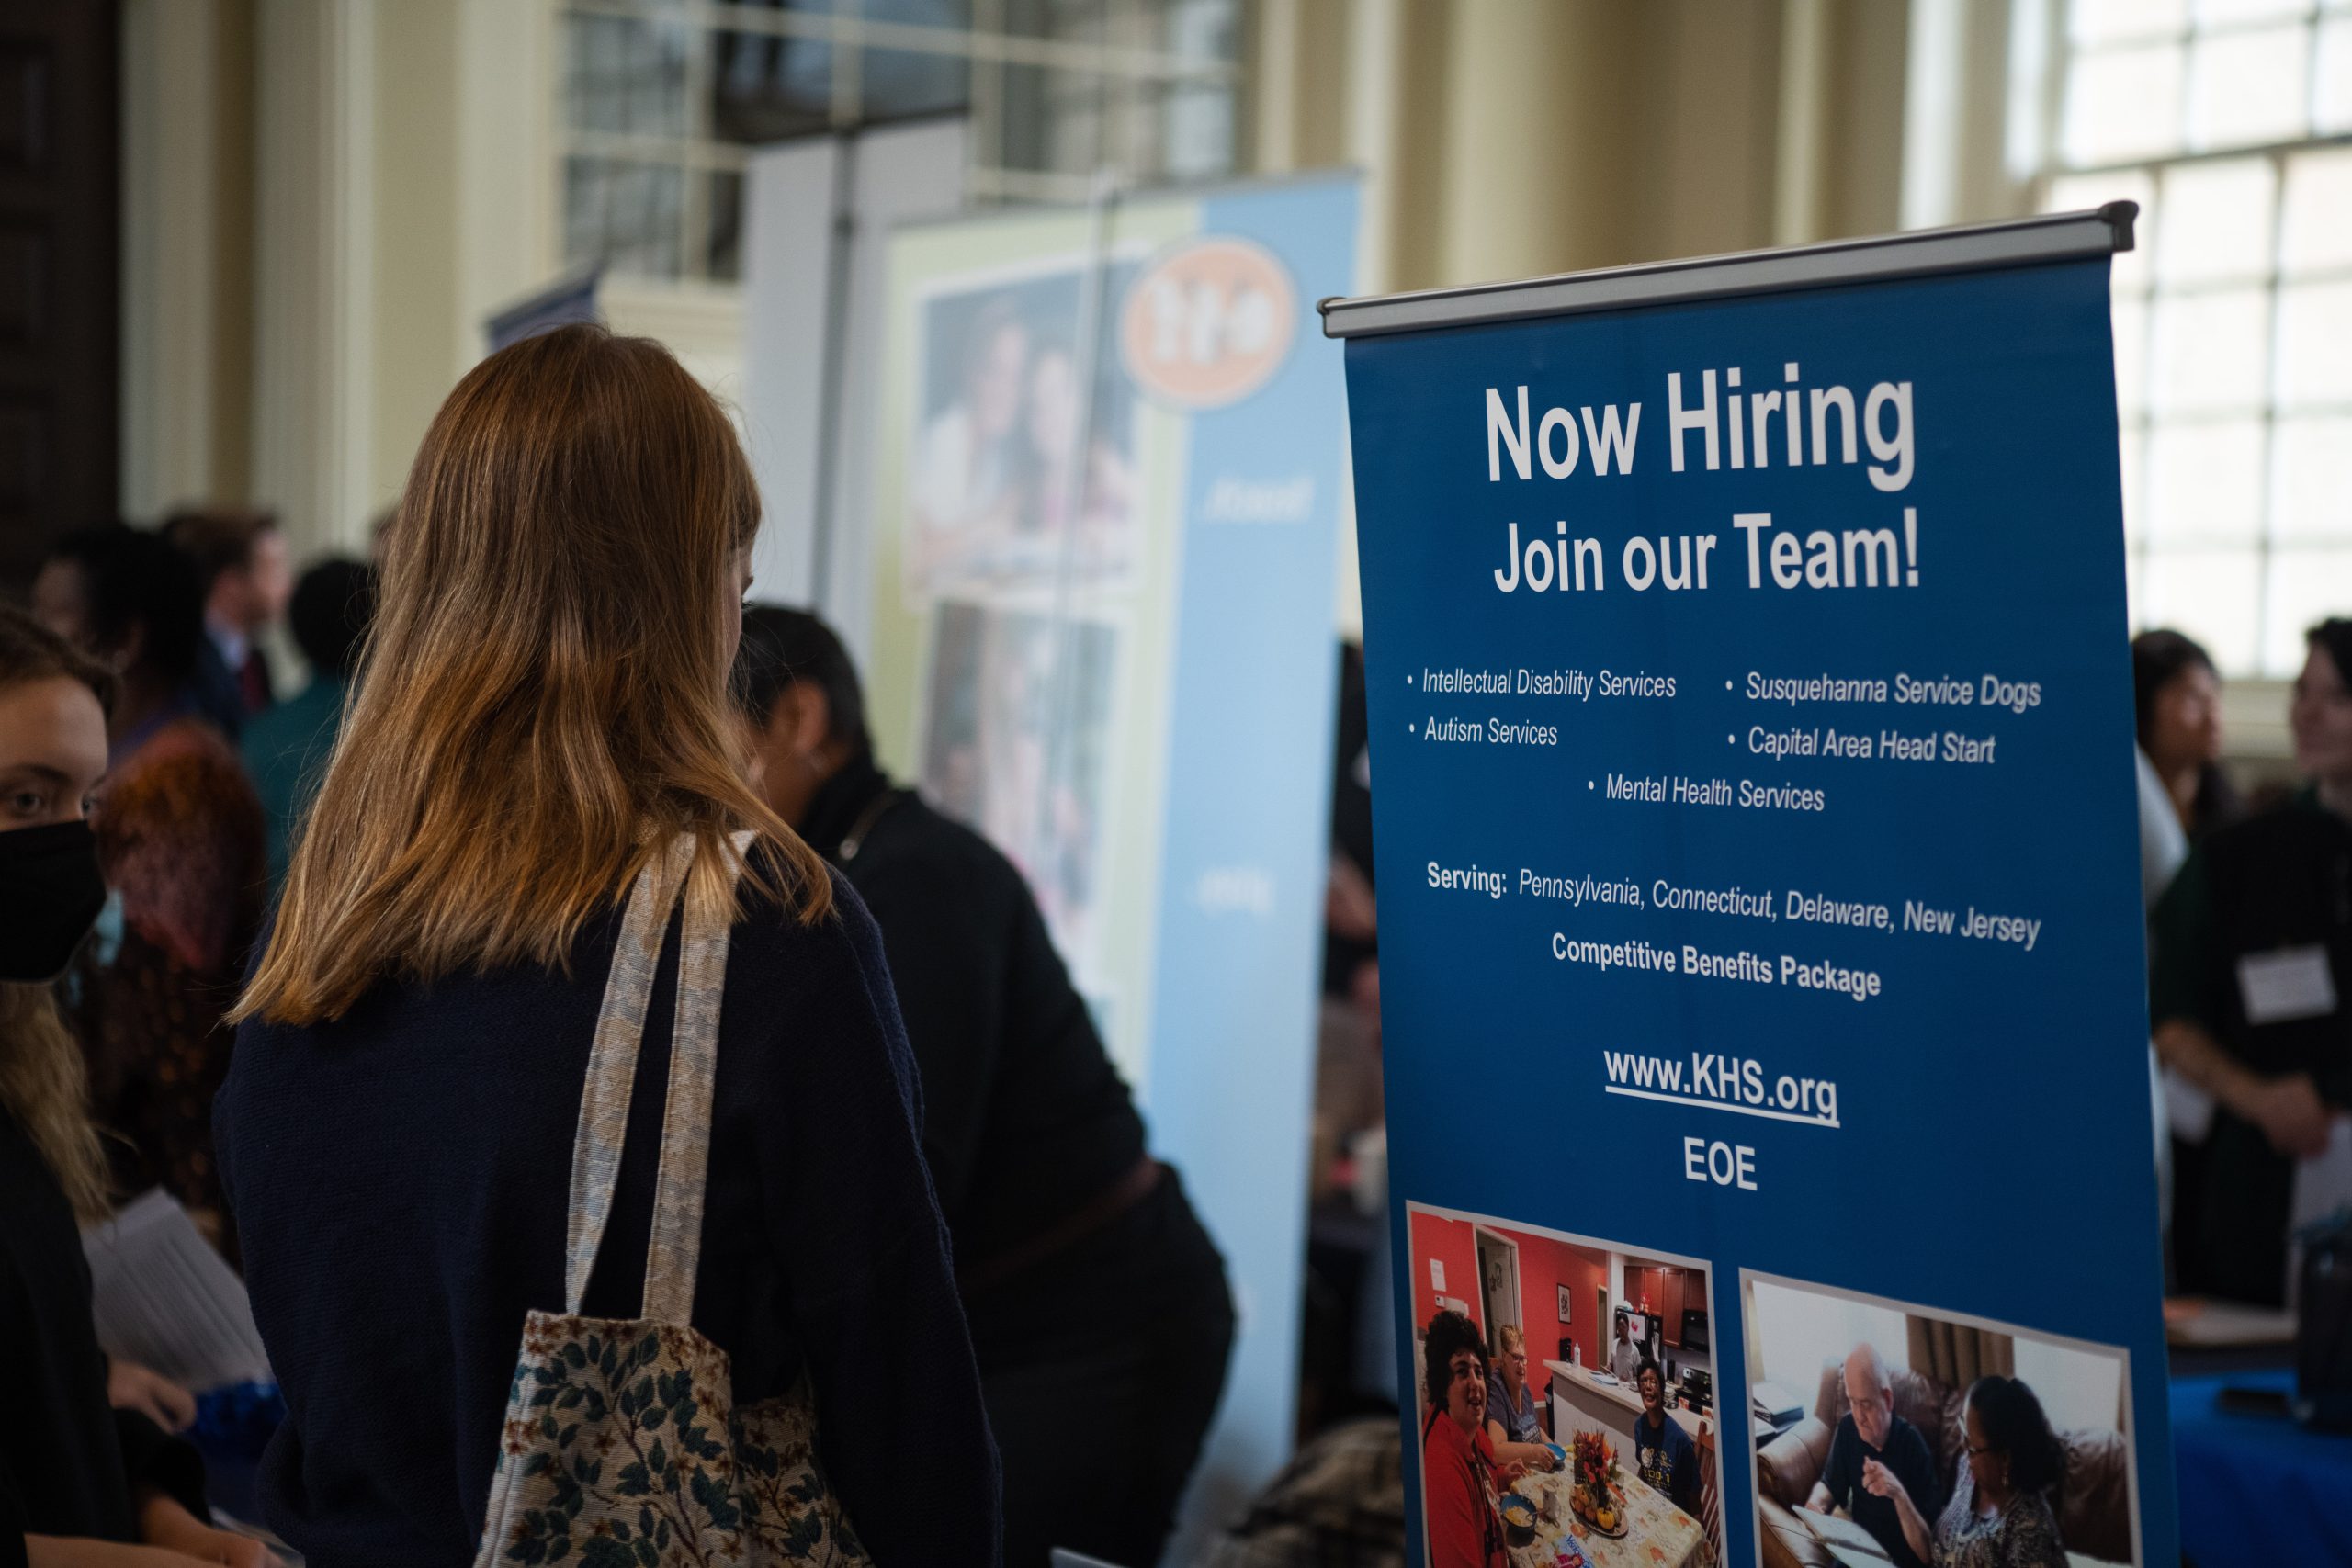 A student at the Tri-College Career Fair next to a sign that says "Now Hiring." Photo taken by Holden Blanco '17.